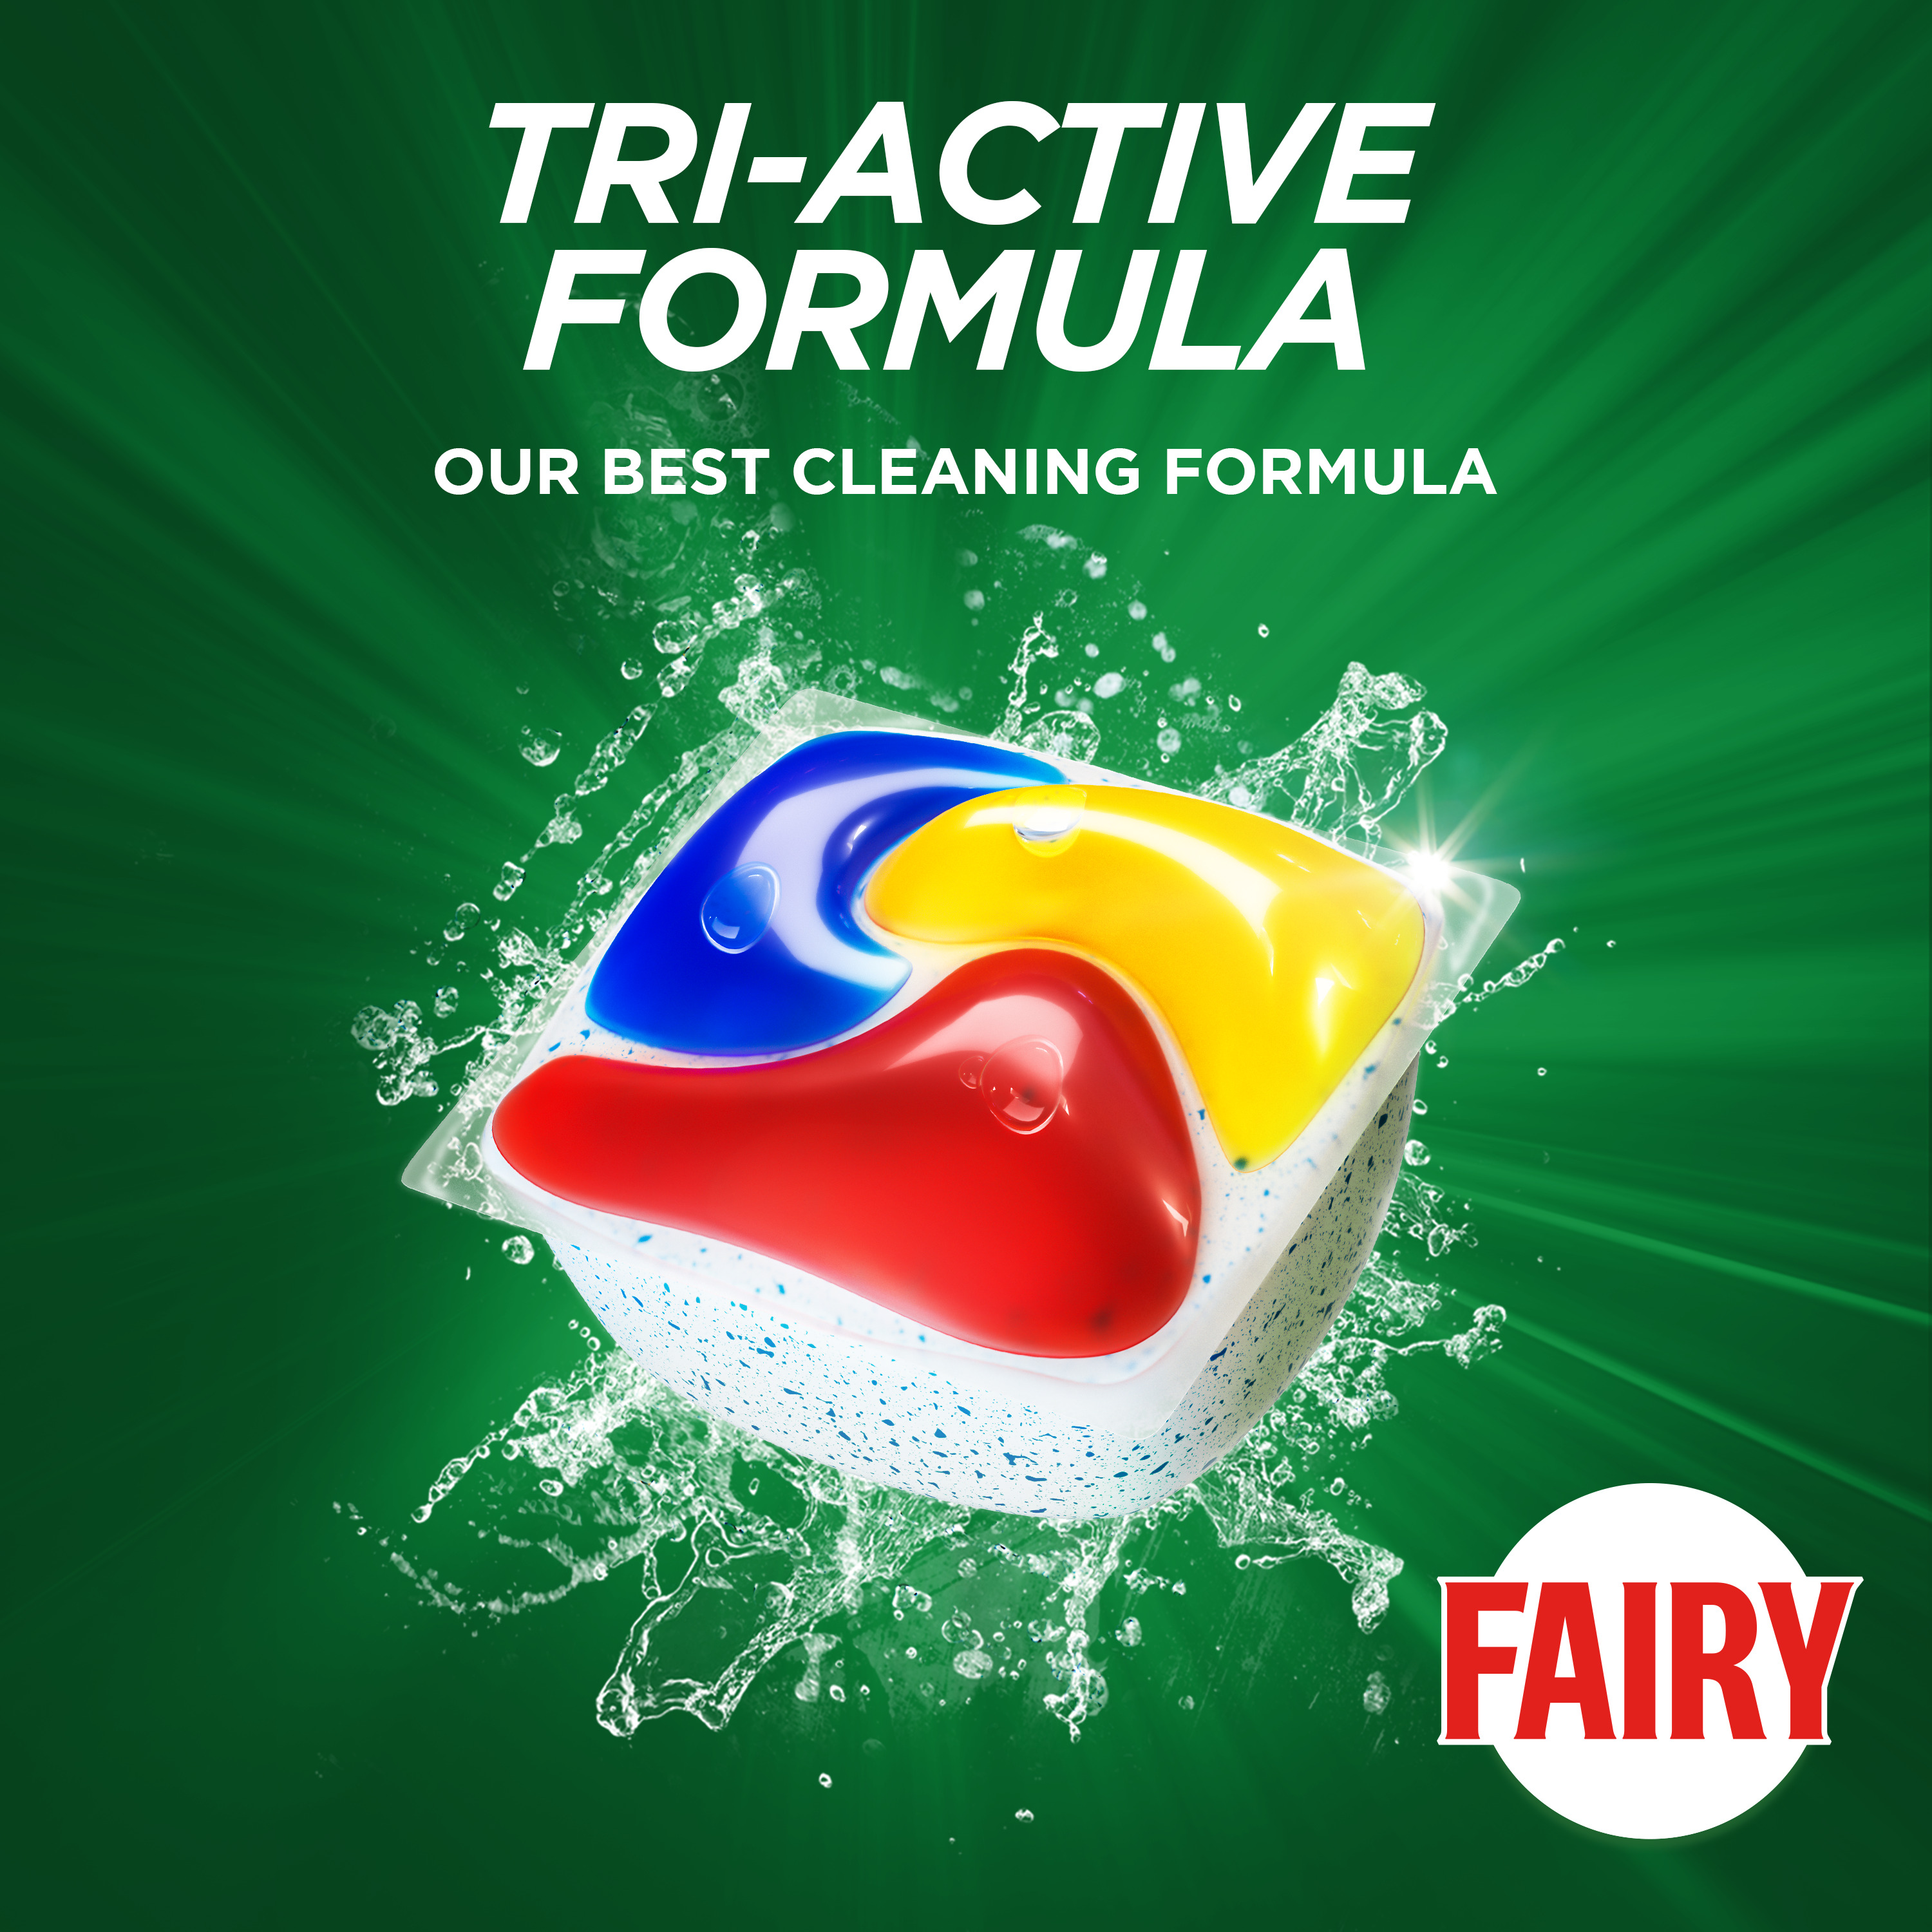 Fairy Platinum Plus Dishwasher Tablet rehydrates, lifts and break down soils, cleans even greasy filters